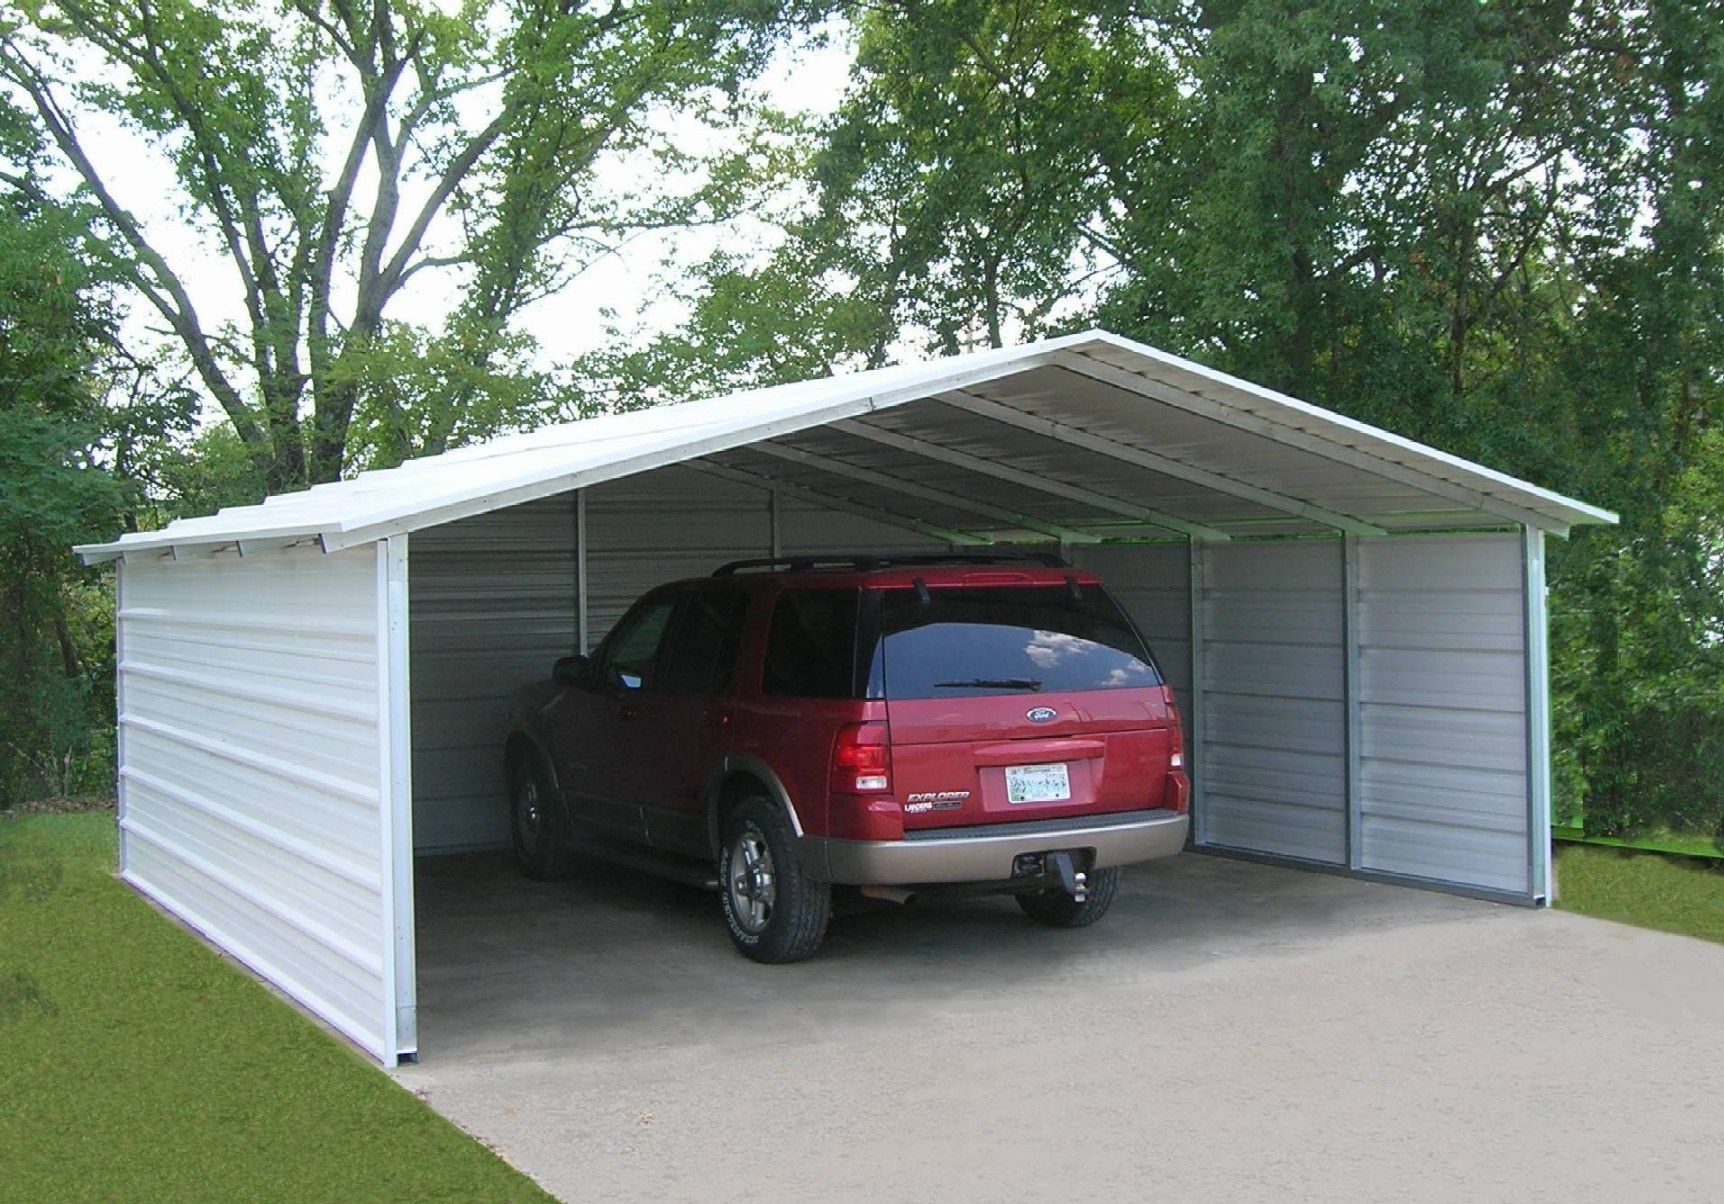 Carports Designed by VersaTube Offer Elegance and More Coverage with